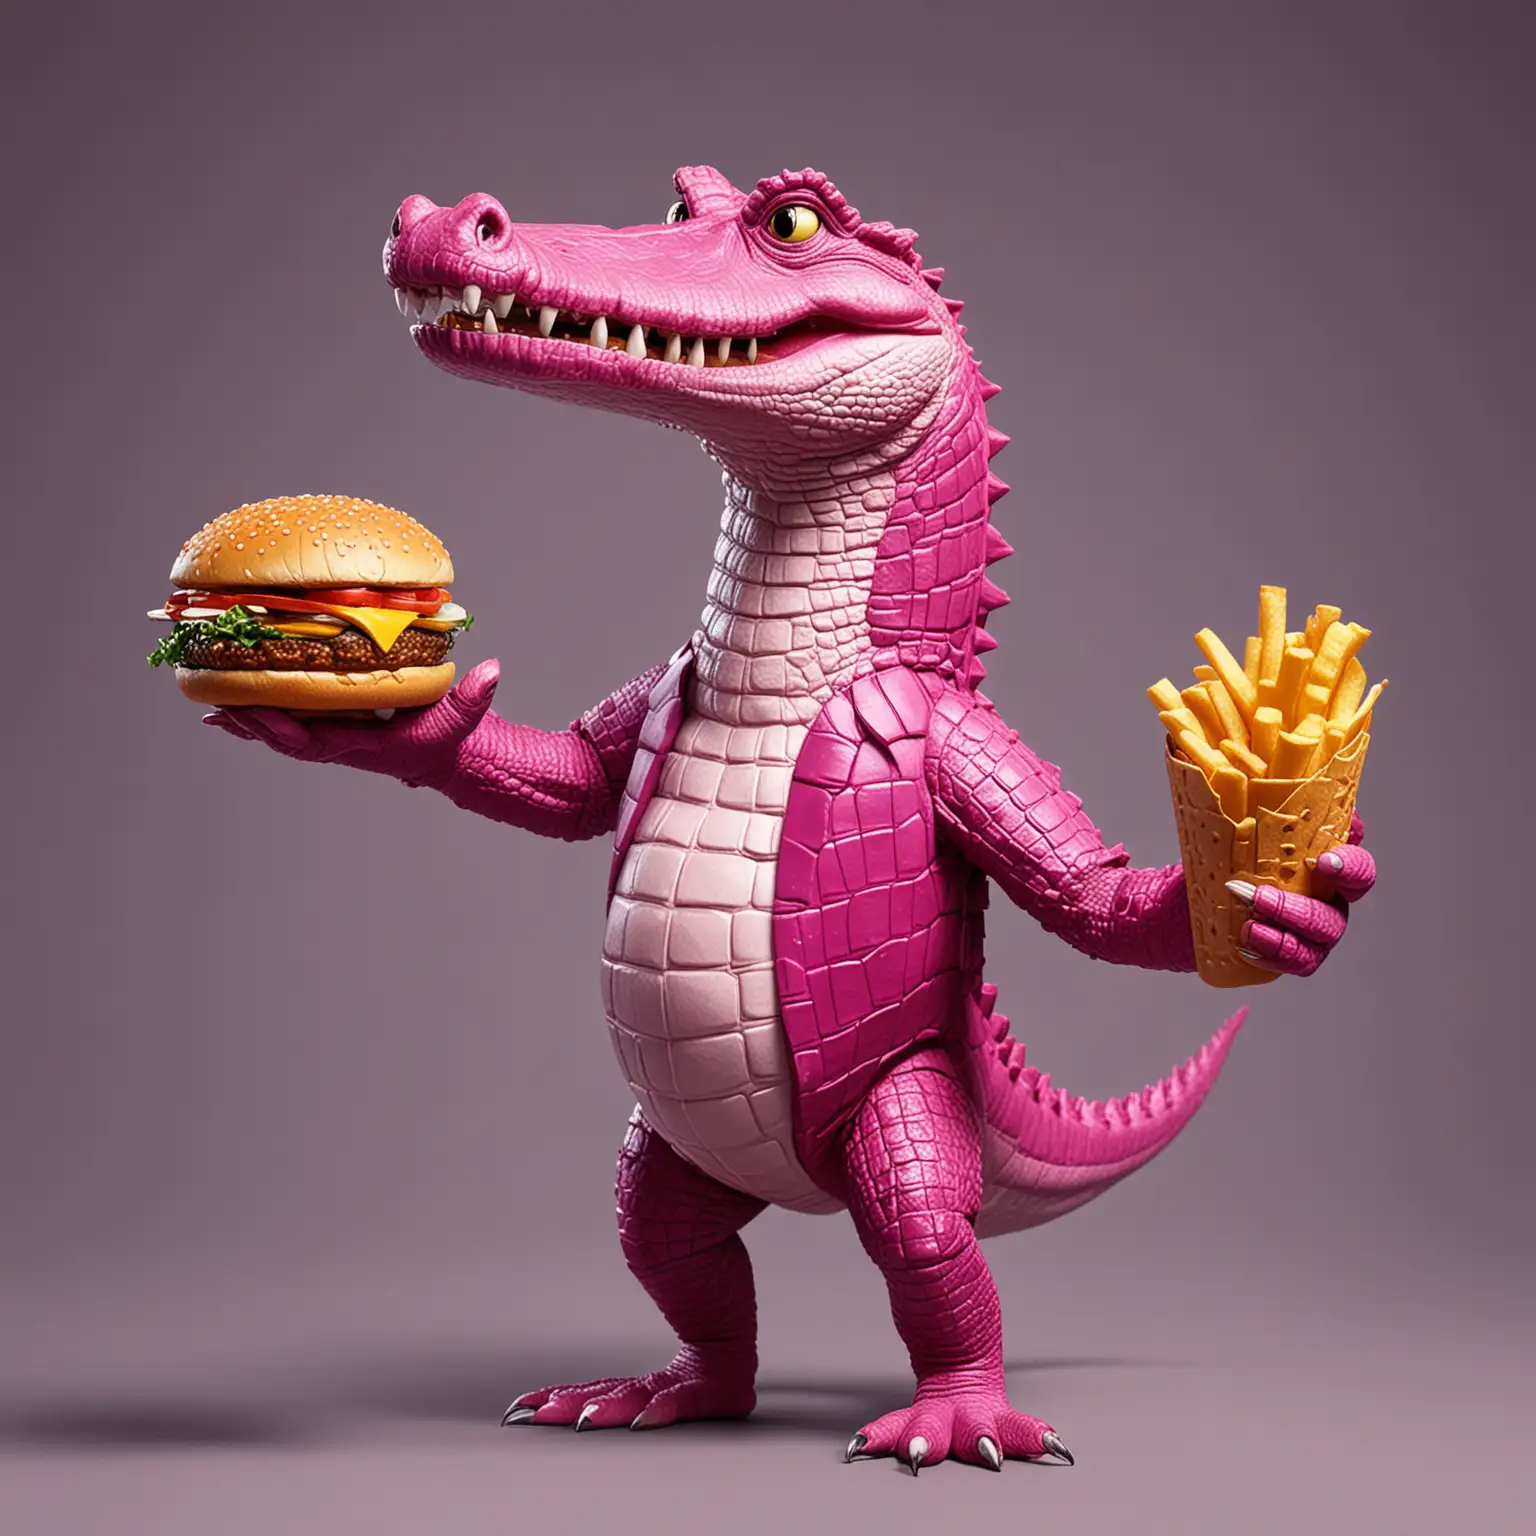 a magenta crocodile holding a hamburger in his hand. The crocodile is tall and skinny